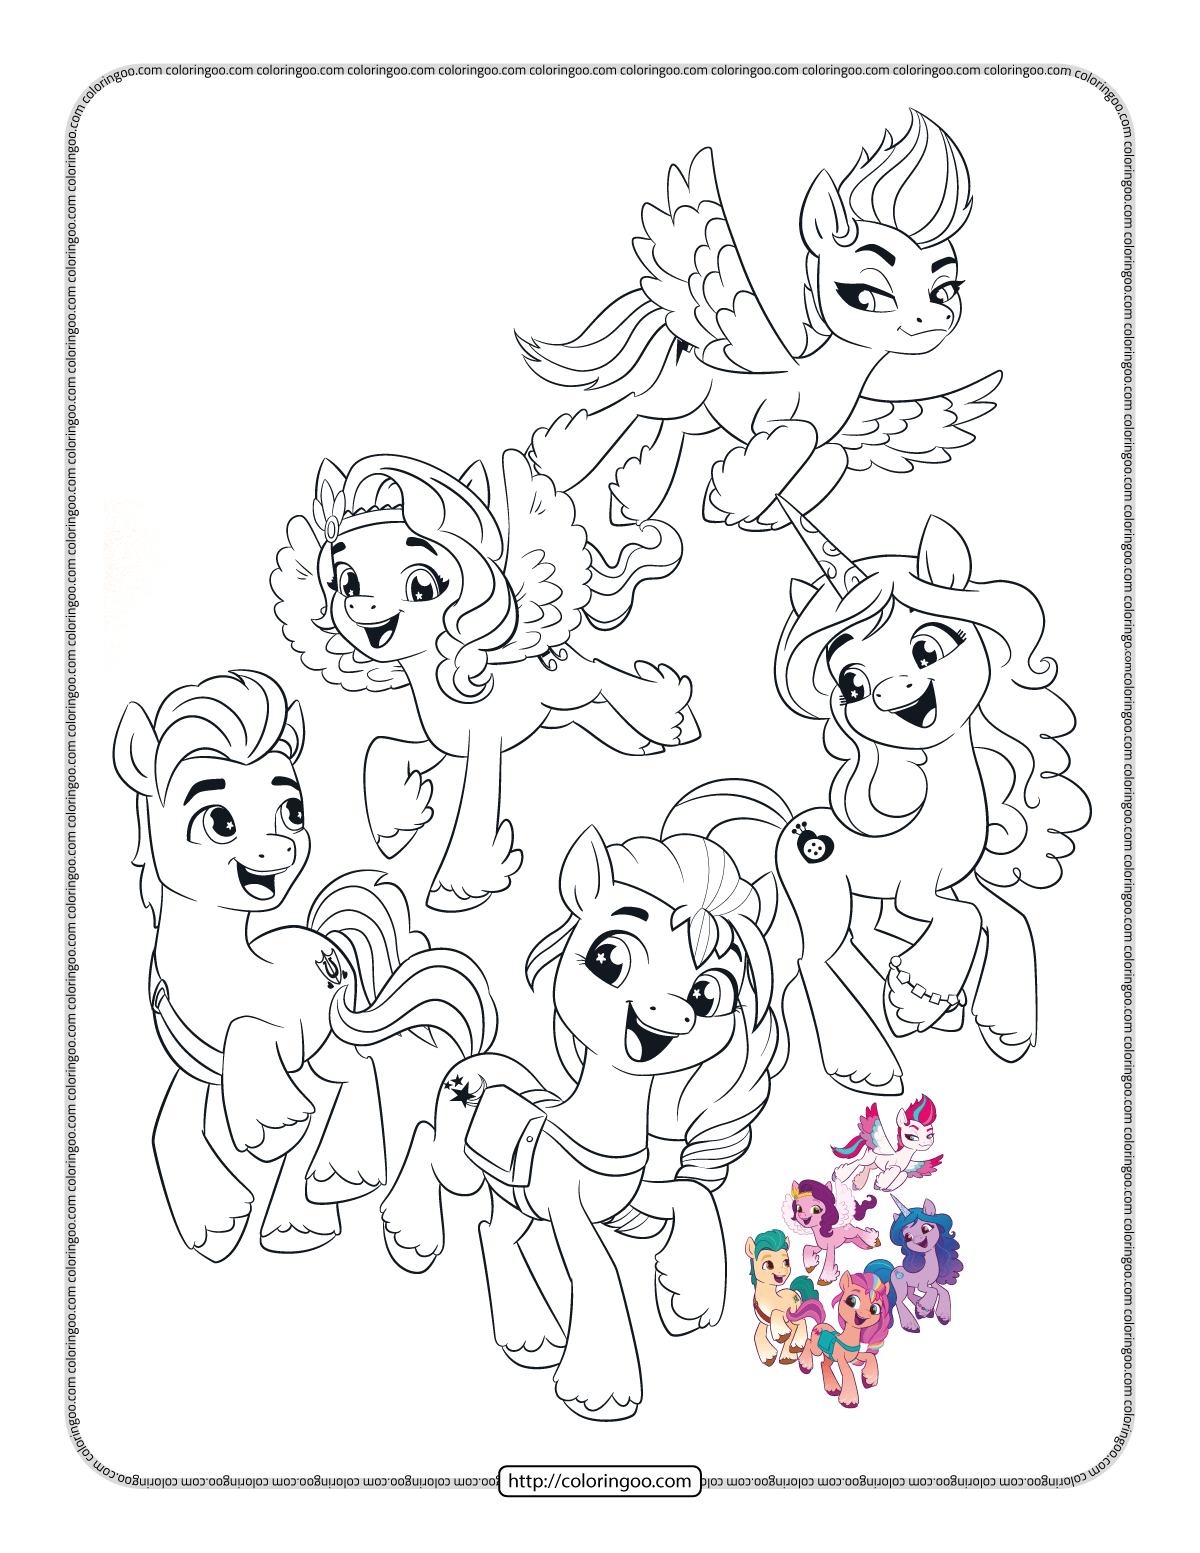 mlp new generation ponies coloring page